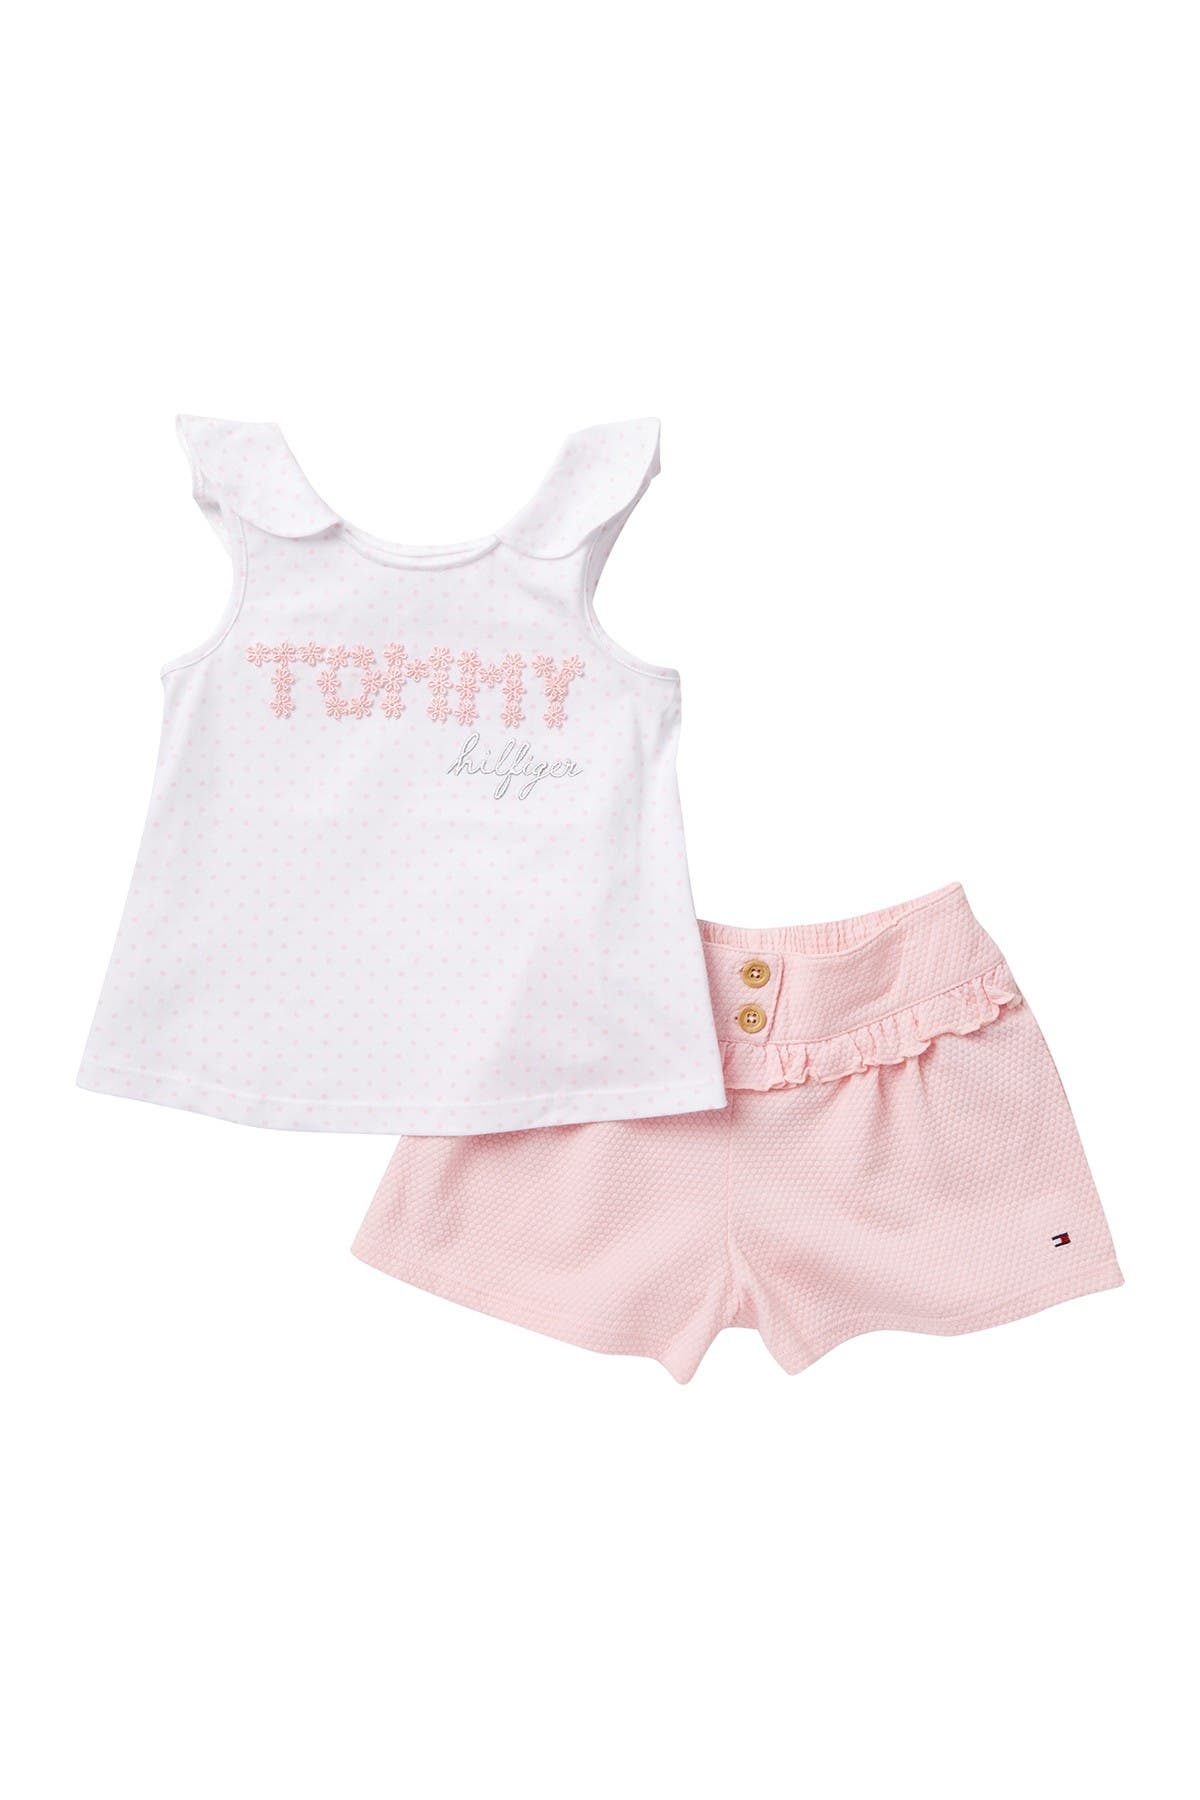 tommy hilfiger crop top and shorts set